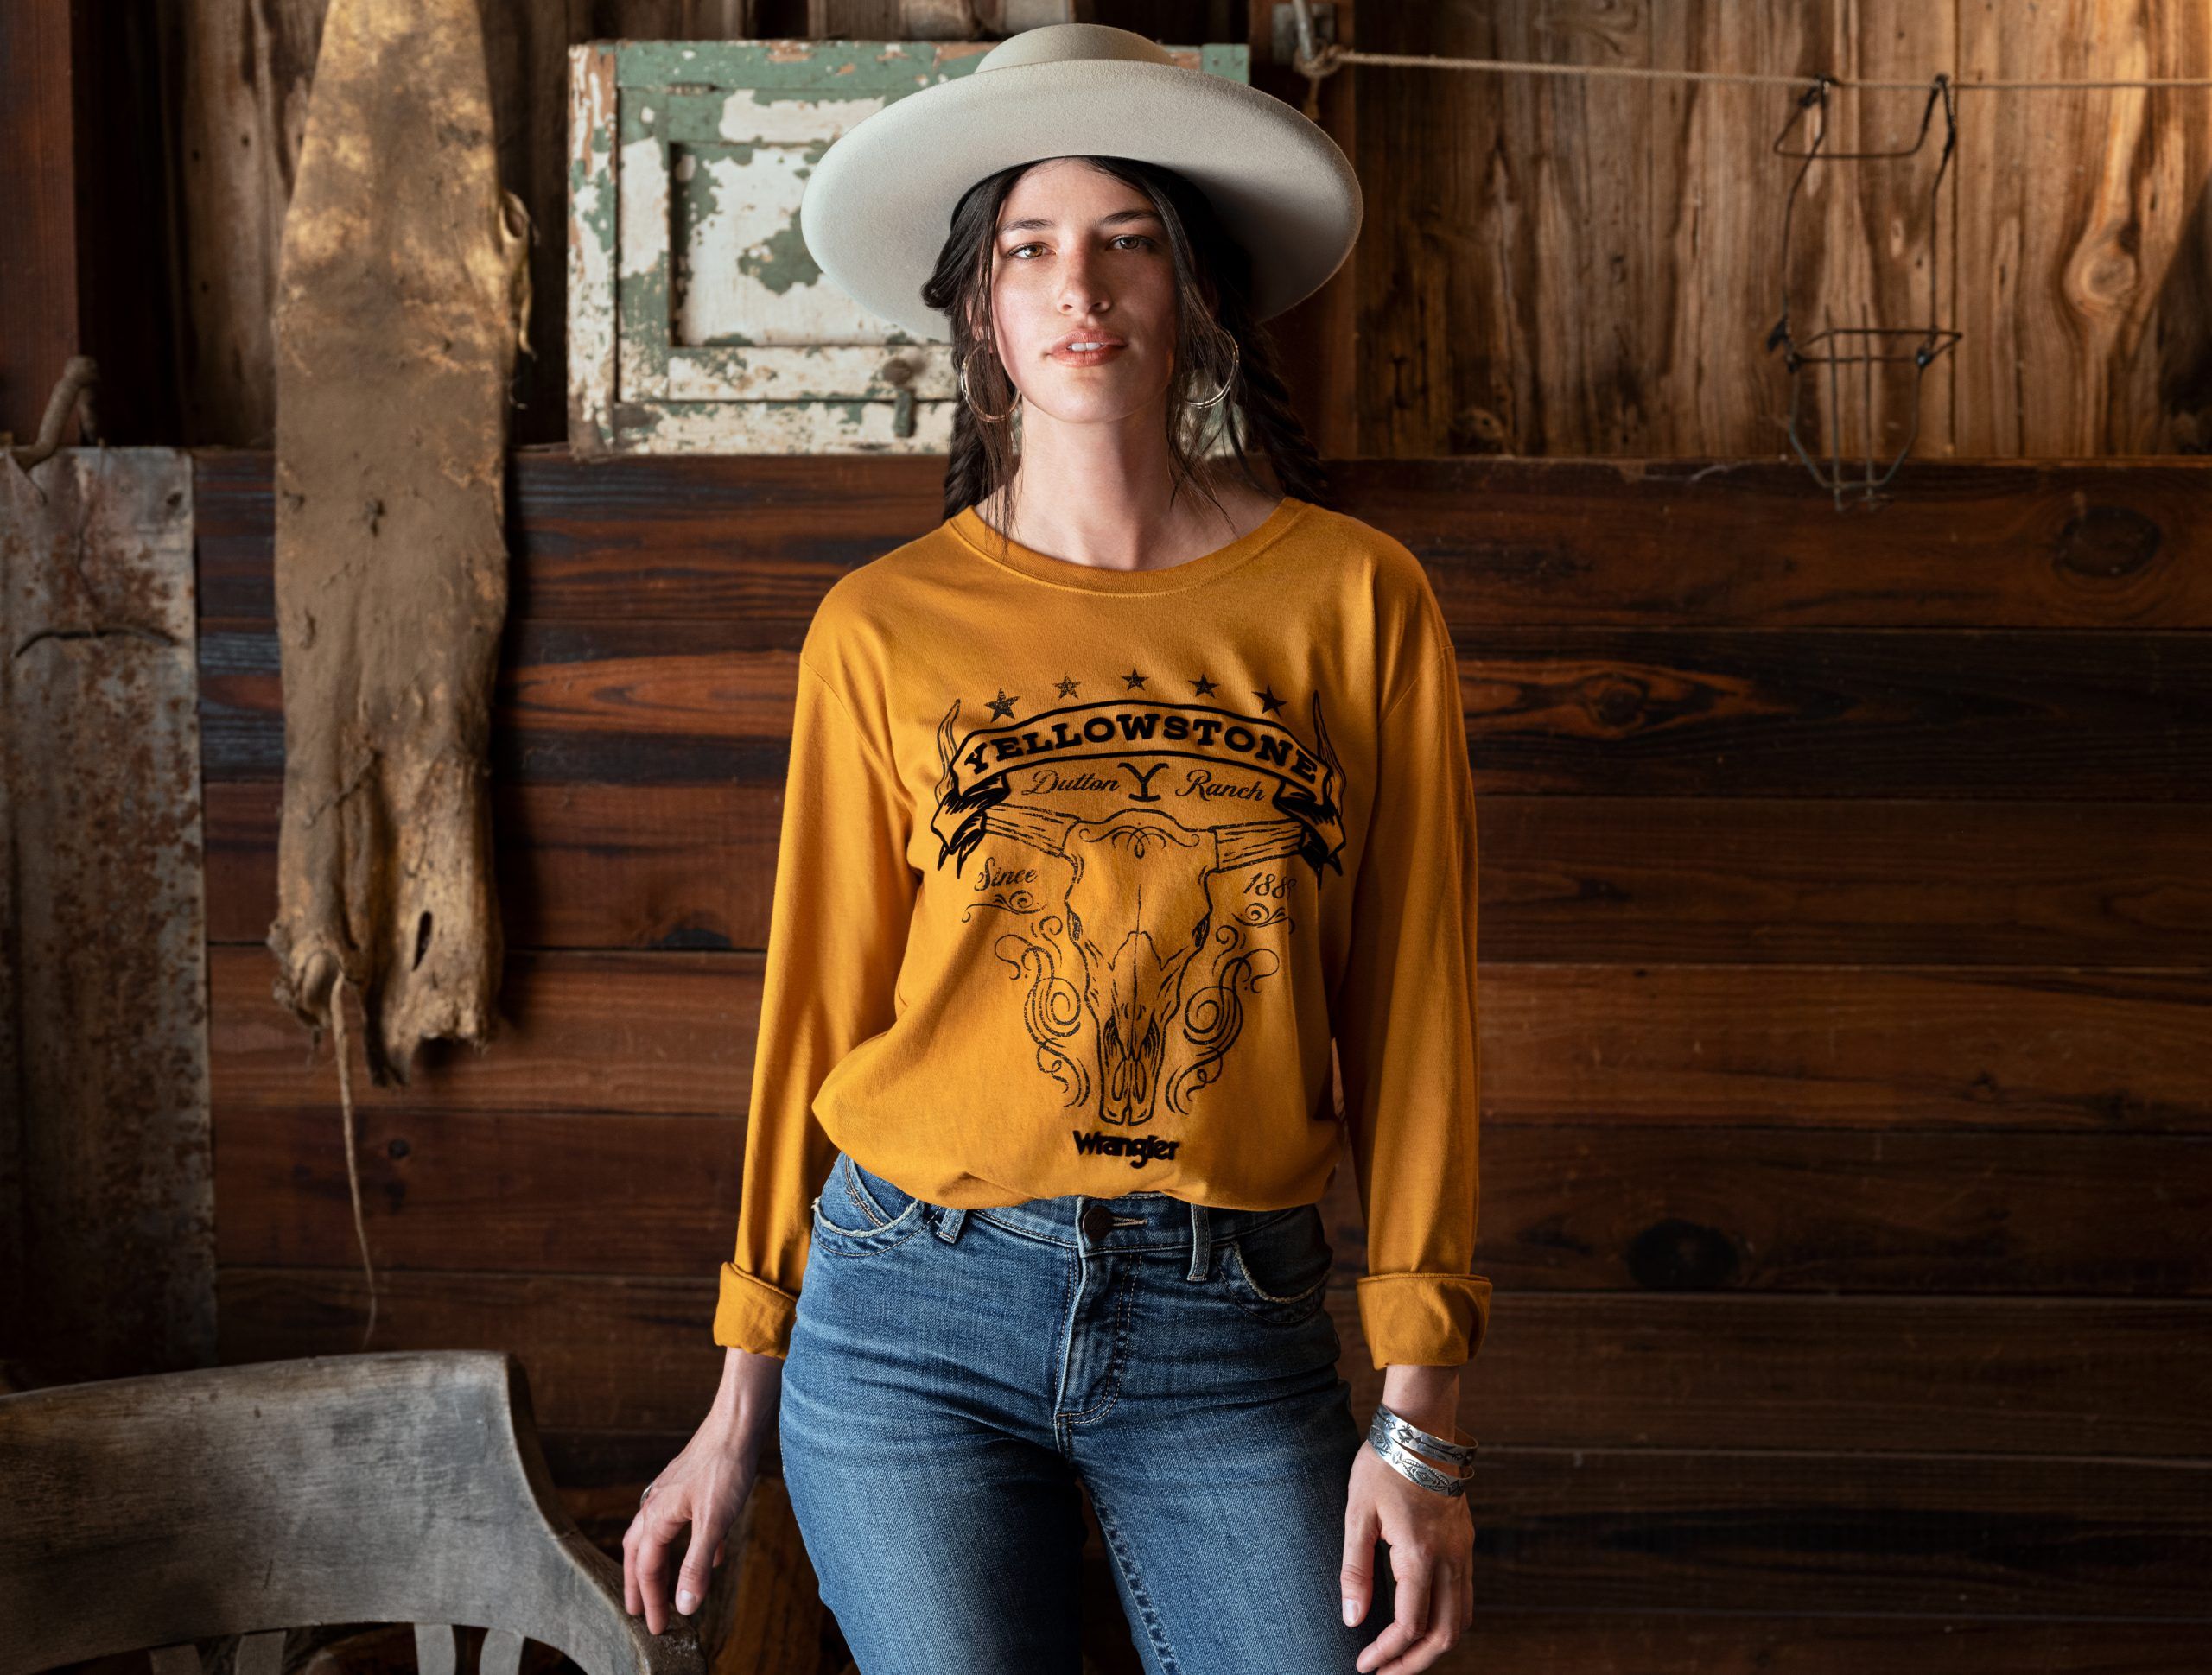 Wrangler Releases New 'Yellowstone' Clothing Collection